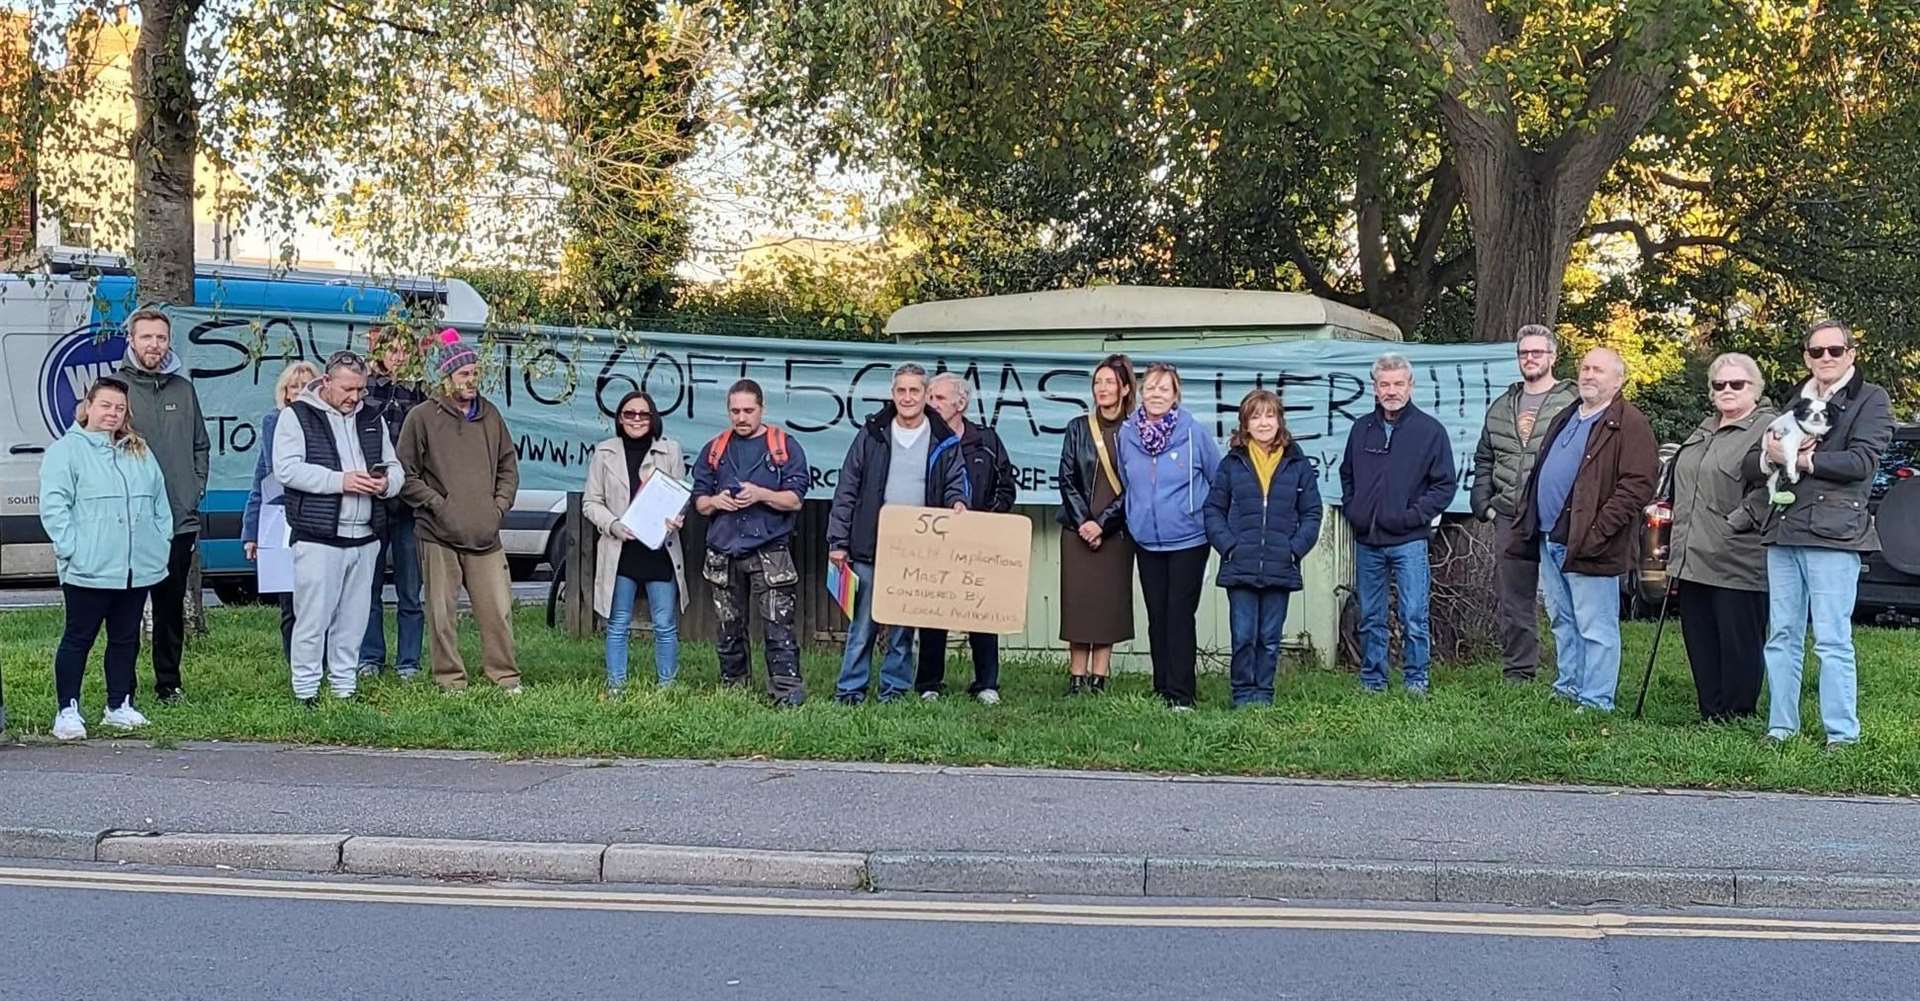 Banner-waving residents are objecting to the plans for a phone mast